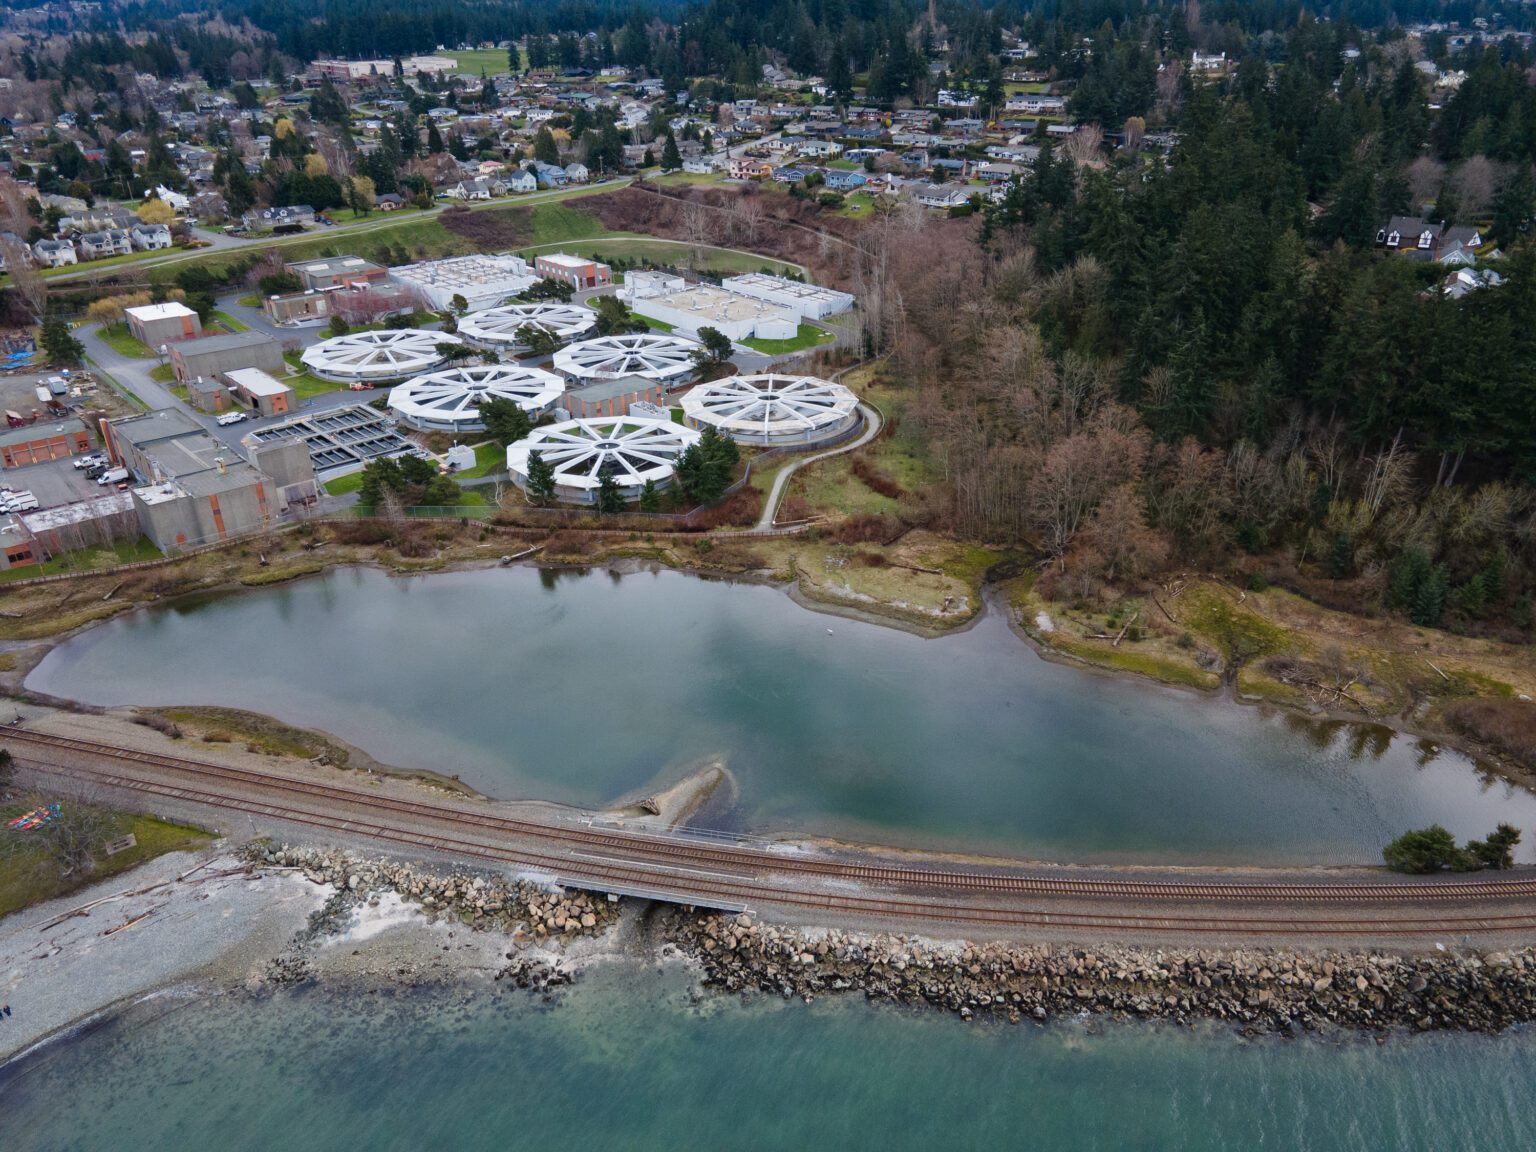 Bellingham City Council members are exploring options for updating the Post Point Wastewater Treatment Facility